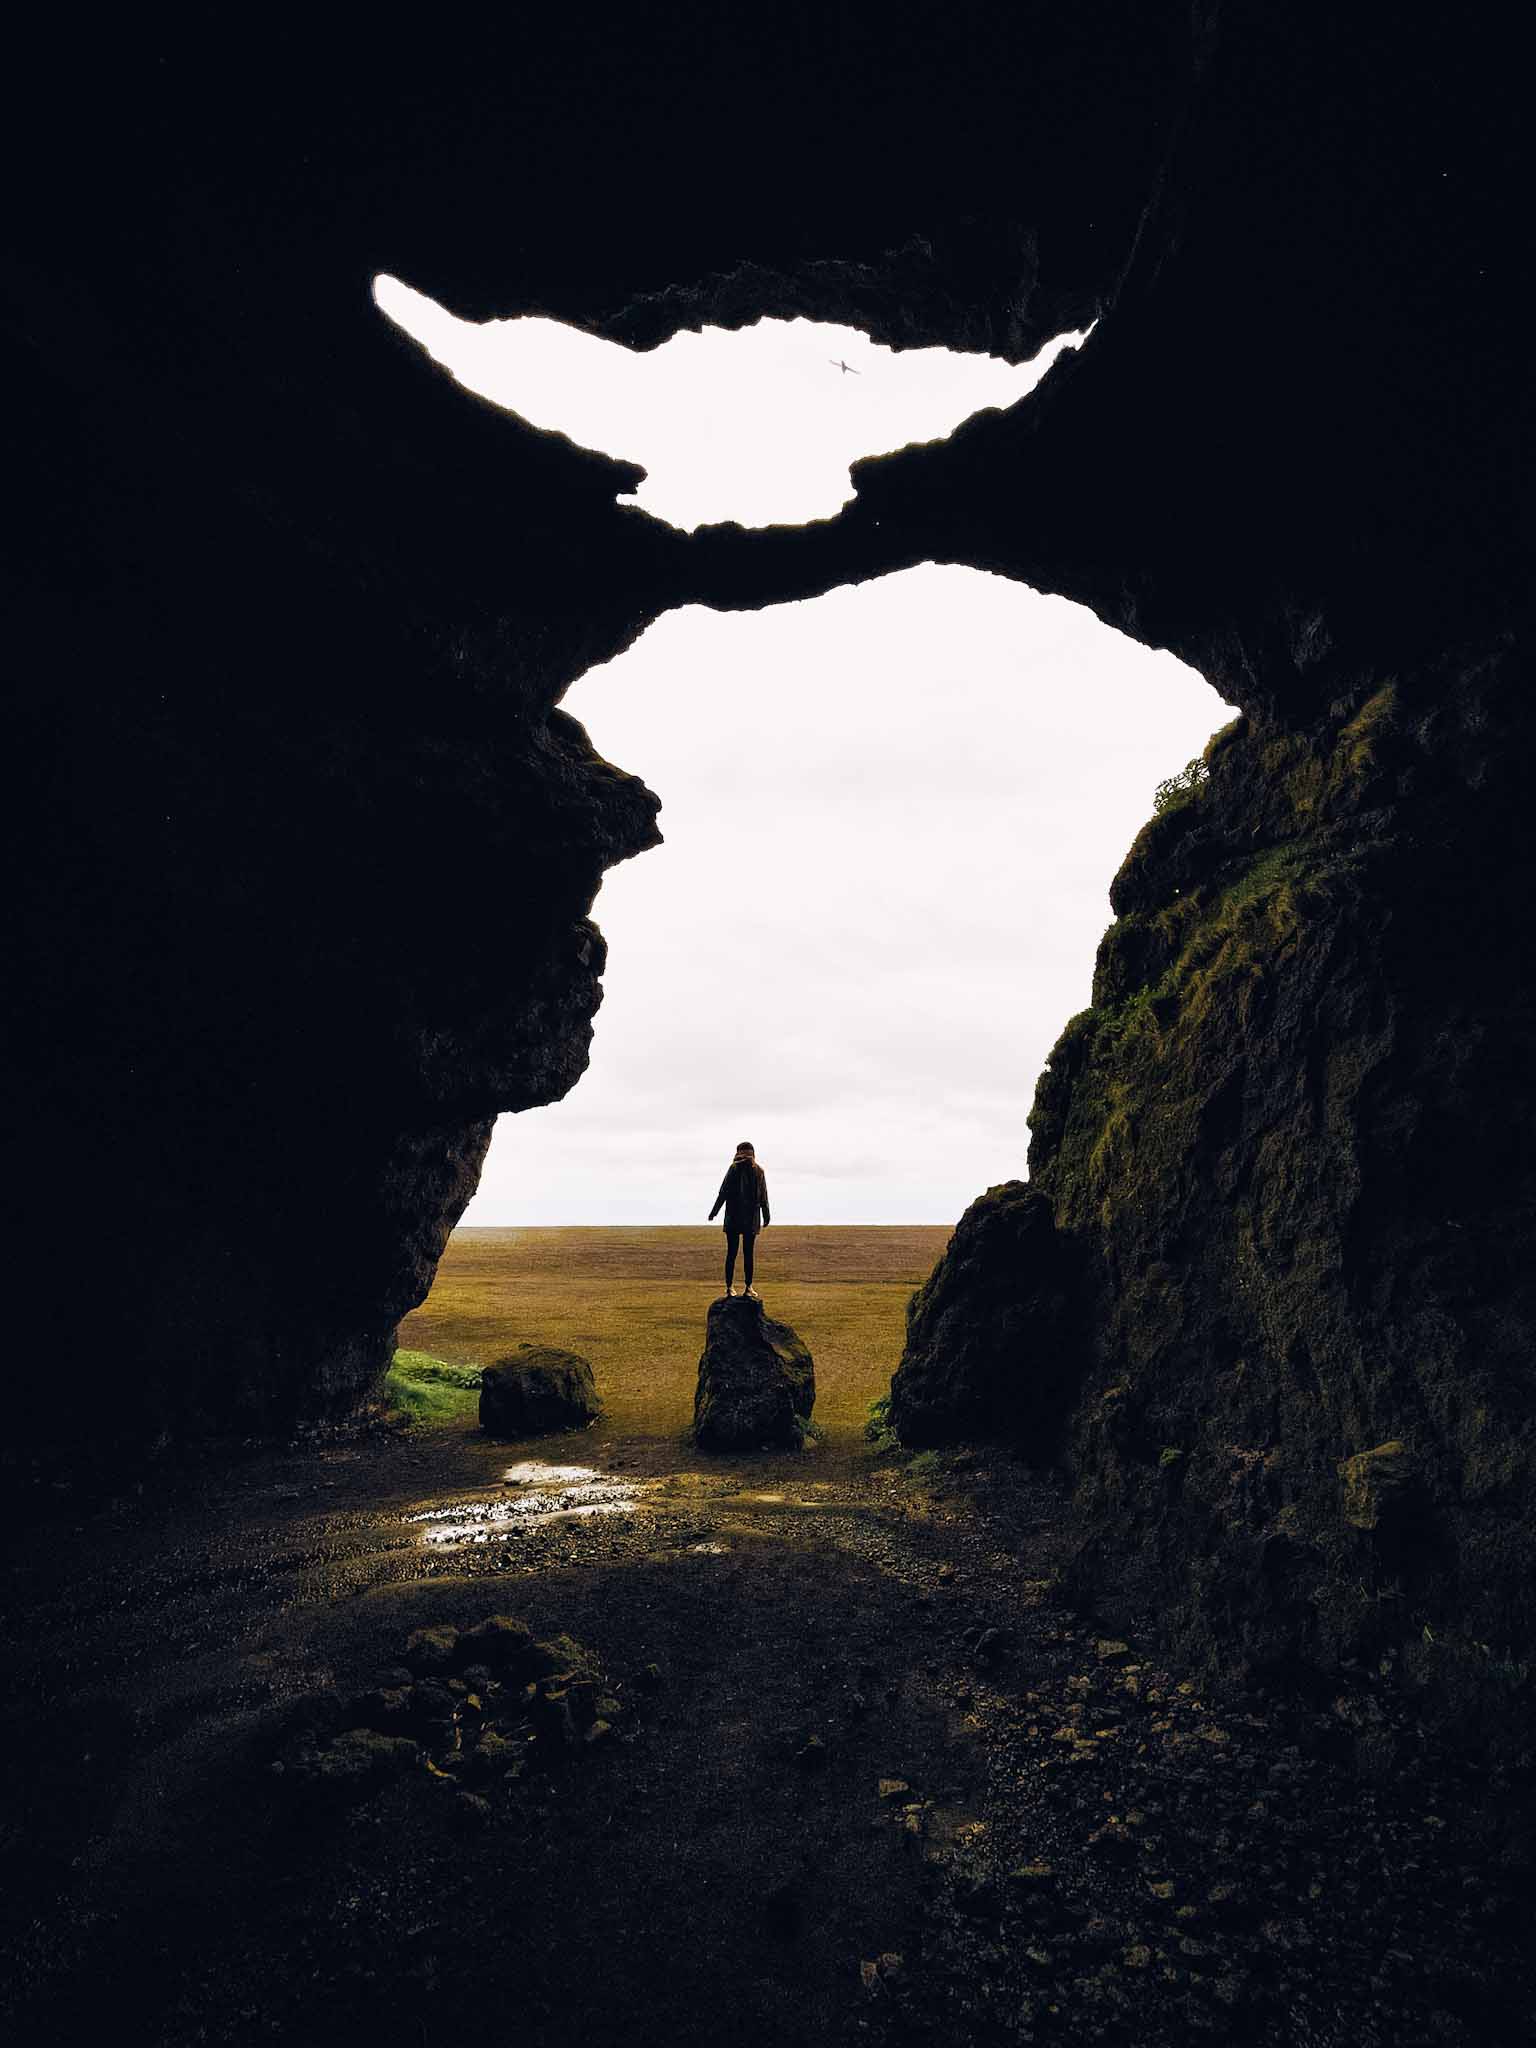 Yoda cave in Iceland